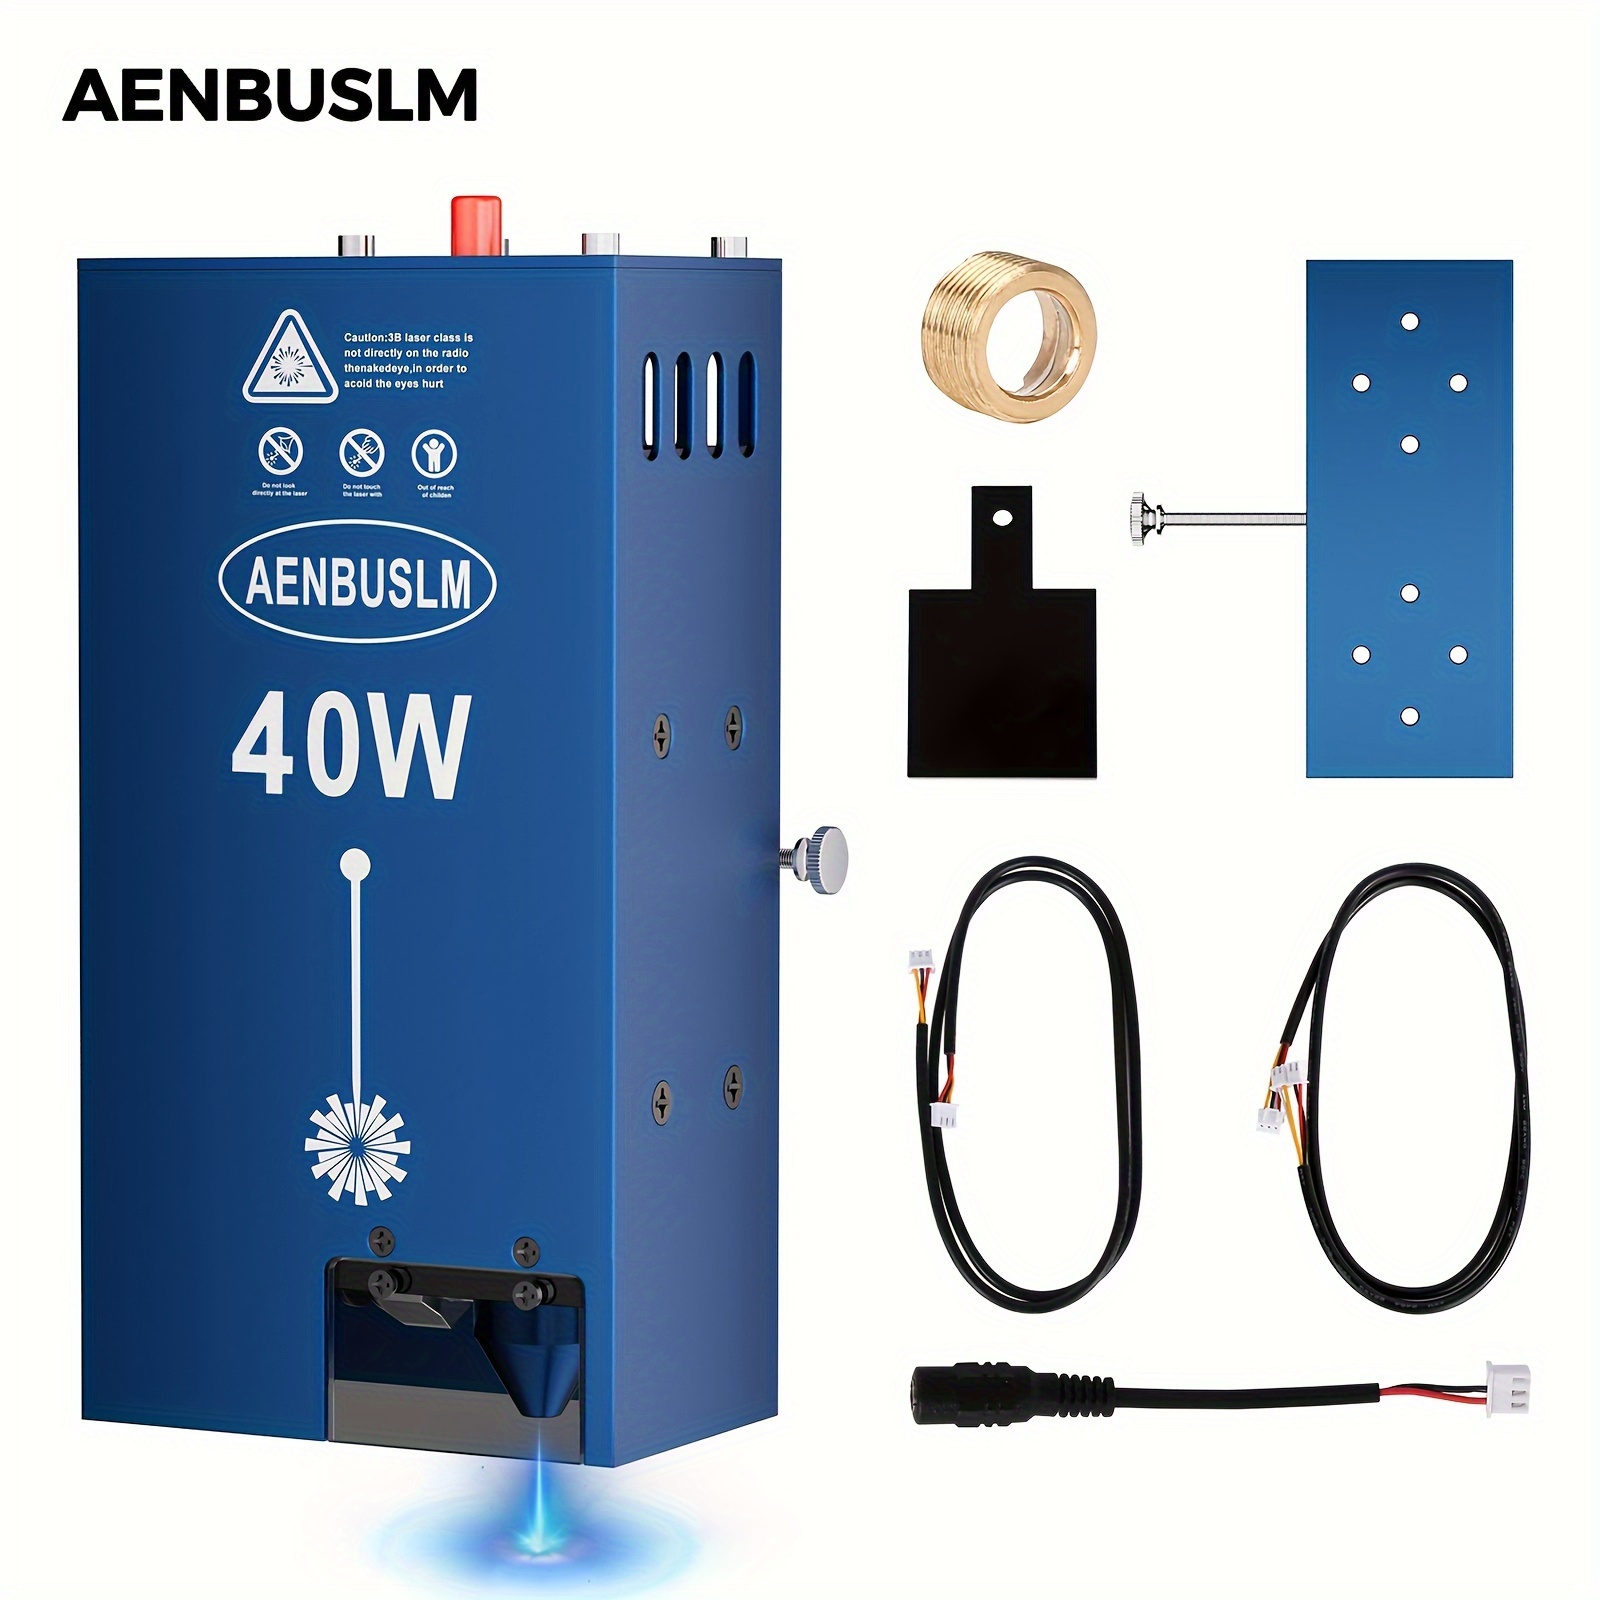 

Aenbuslm 5.5w Engraving Laser Module 40w Engraving Laser, Built-in Air-assisted Air Pump In 1 For Making 3d Wooden Puzzles, Cutting Engraving Tool For Wood Metal Aluminum Leather